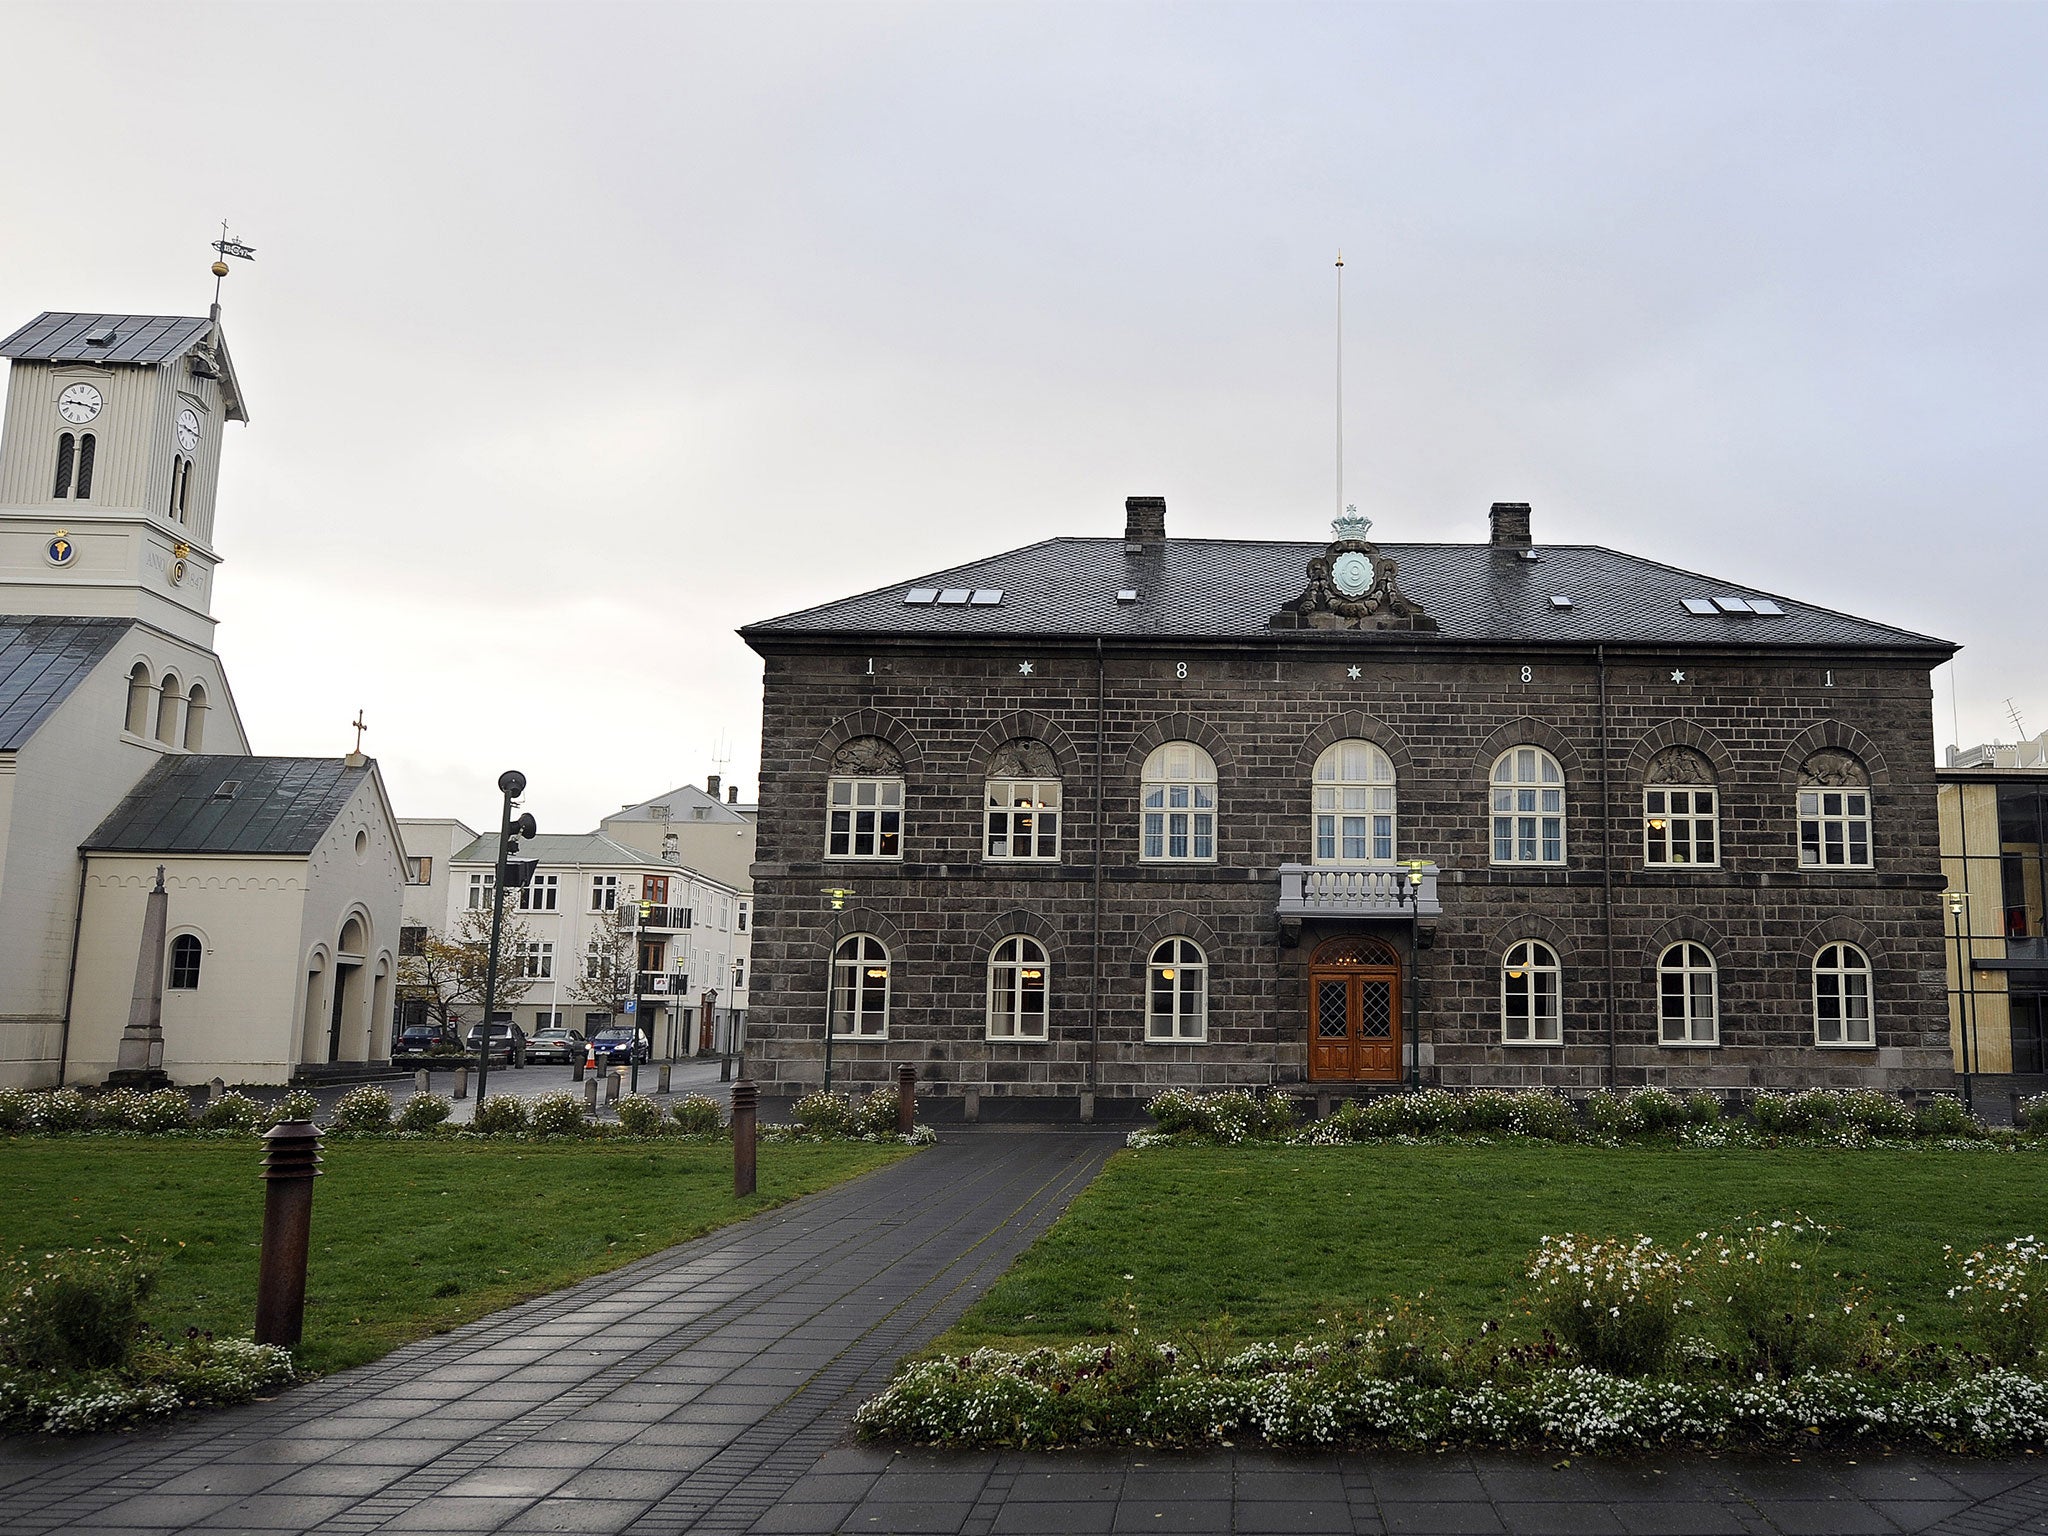 The building housing Iceland's parliament